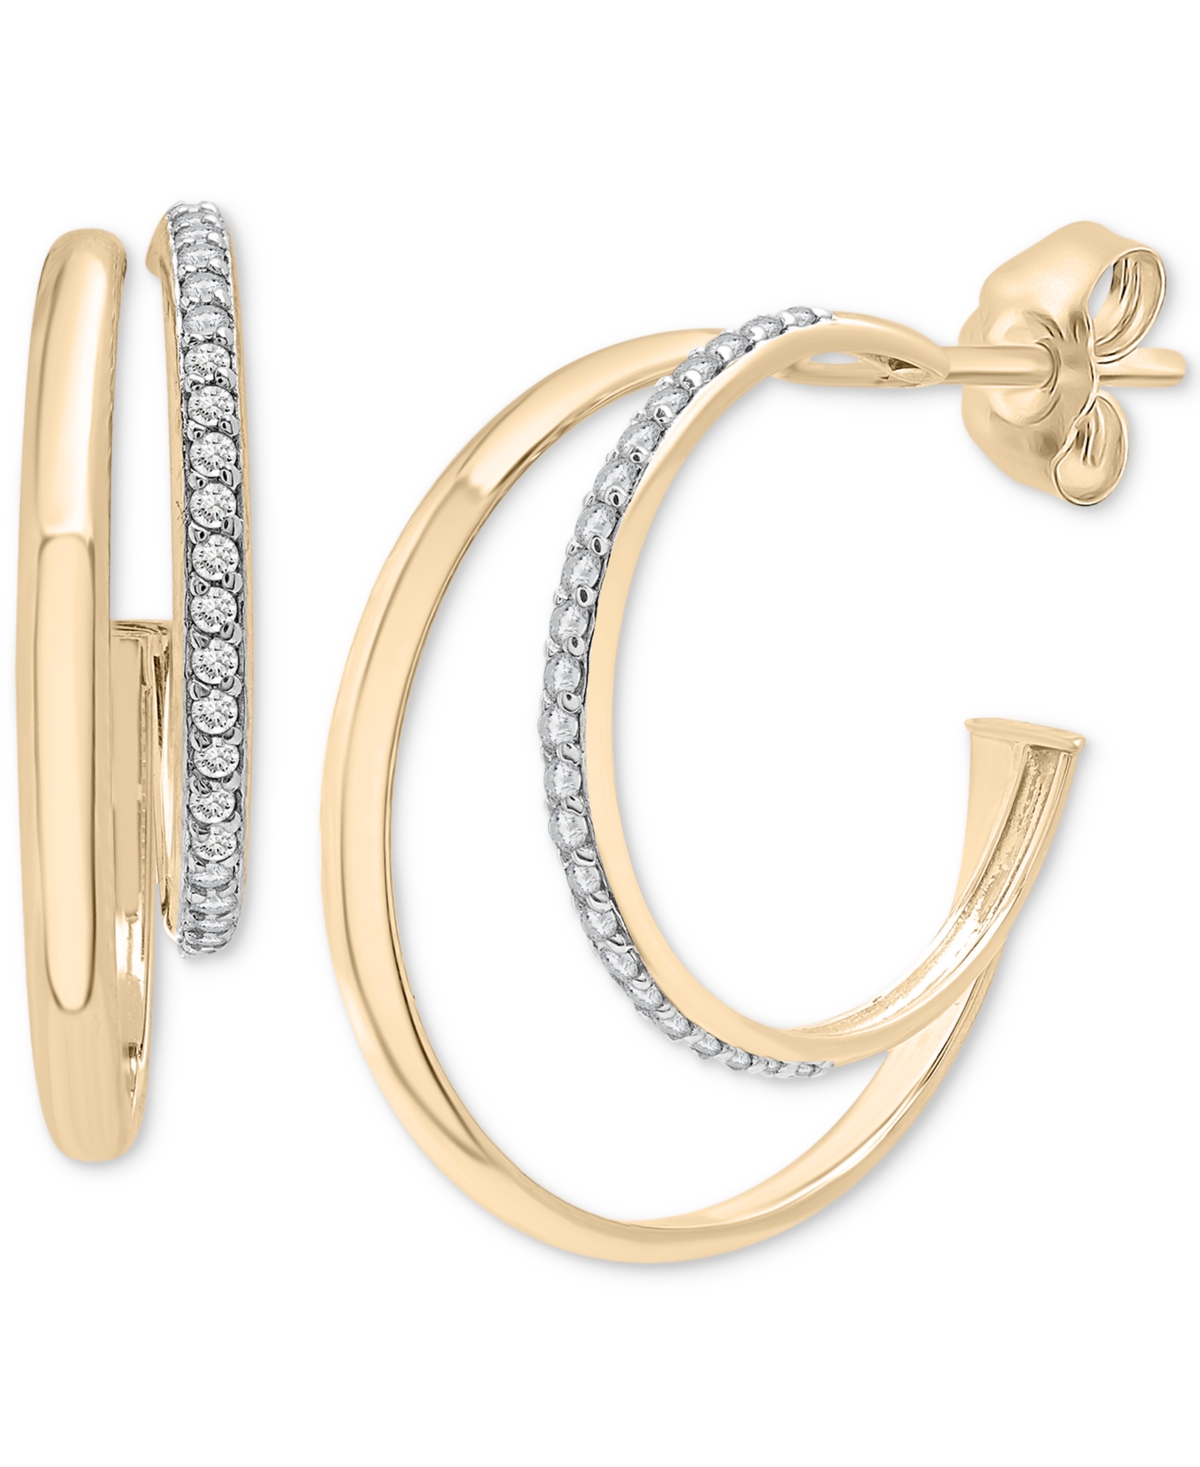 Diamond Double Small Hoop Earrings (1/4 ct. t.w.) in Gold Vermeil, Created for Macy's - Gold Vermeil